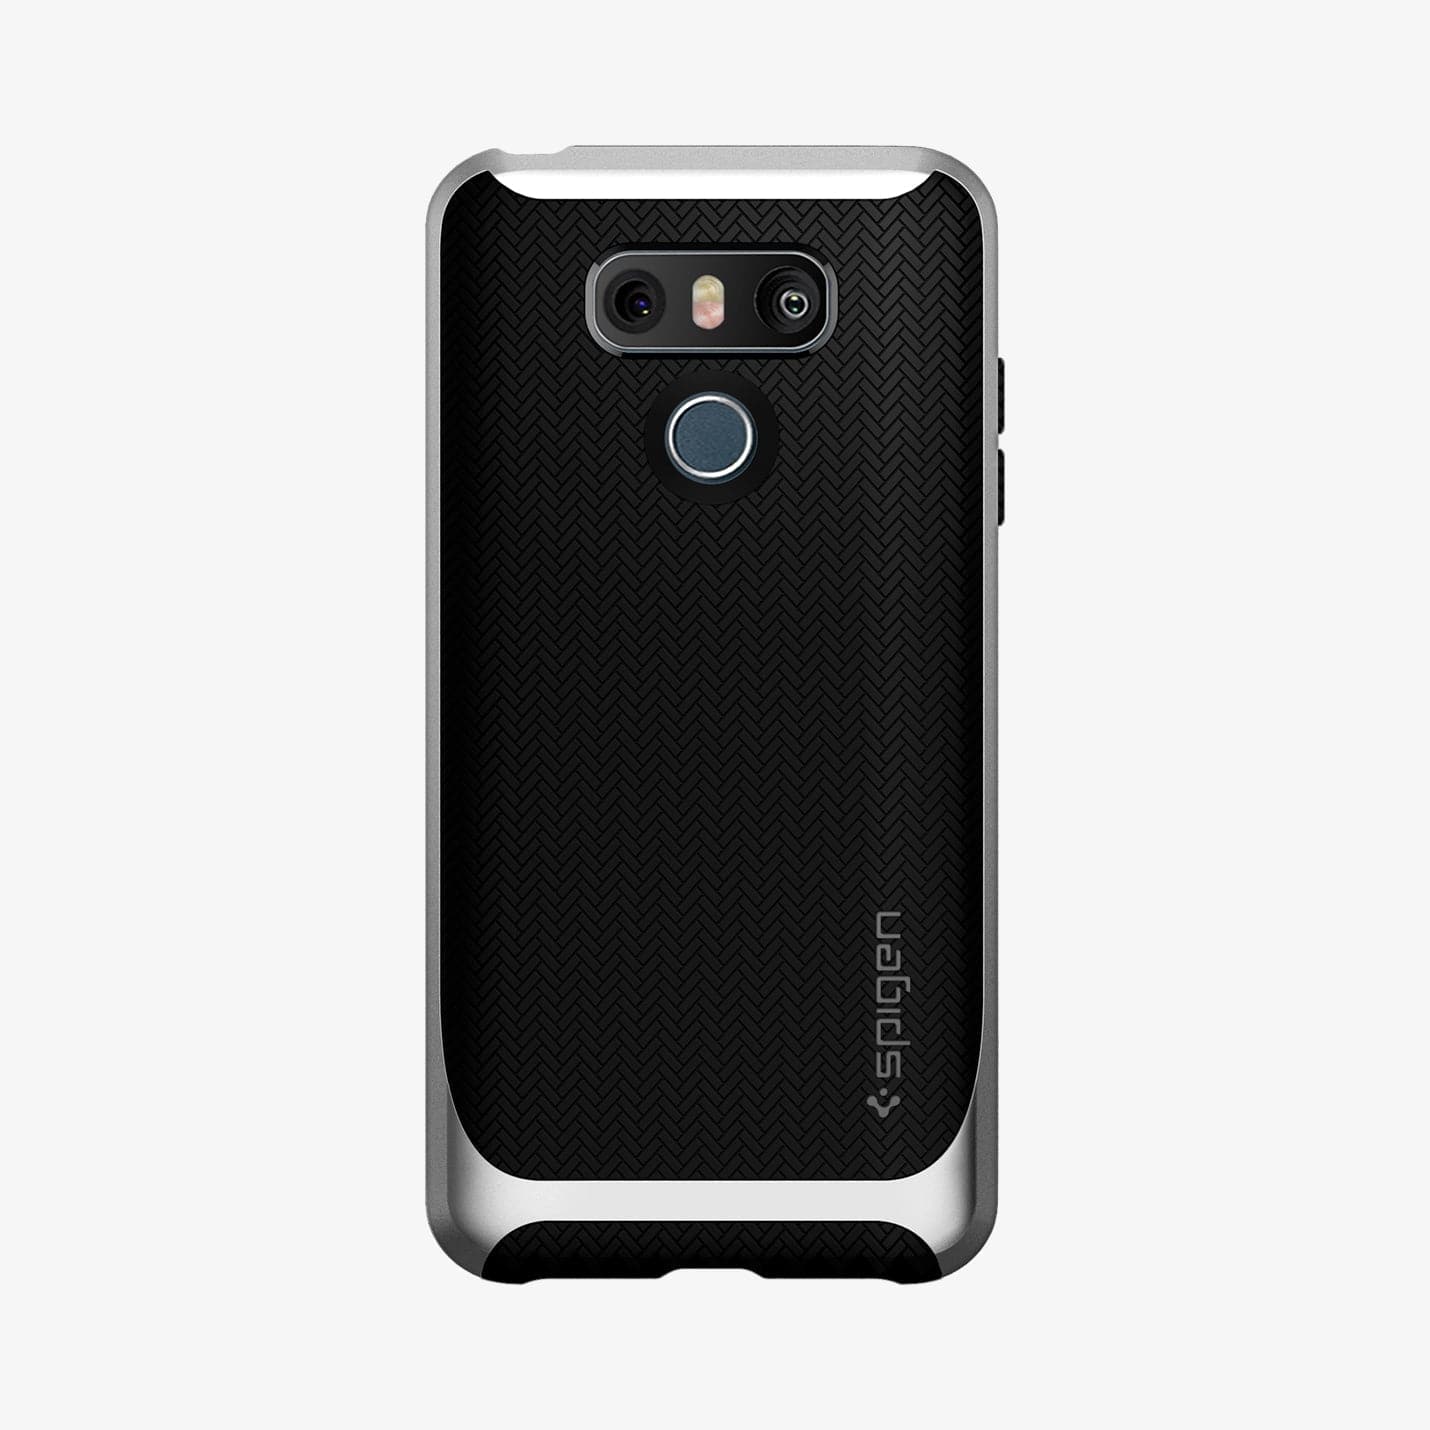 A21CS21237 - LG G Series Neo Hybrid Case in satin silver showing the back